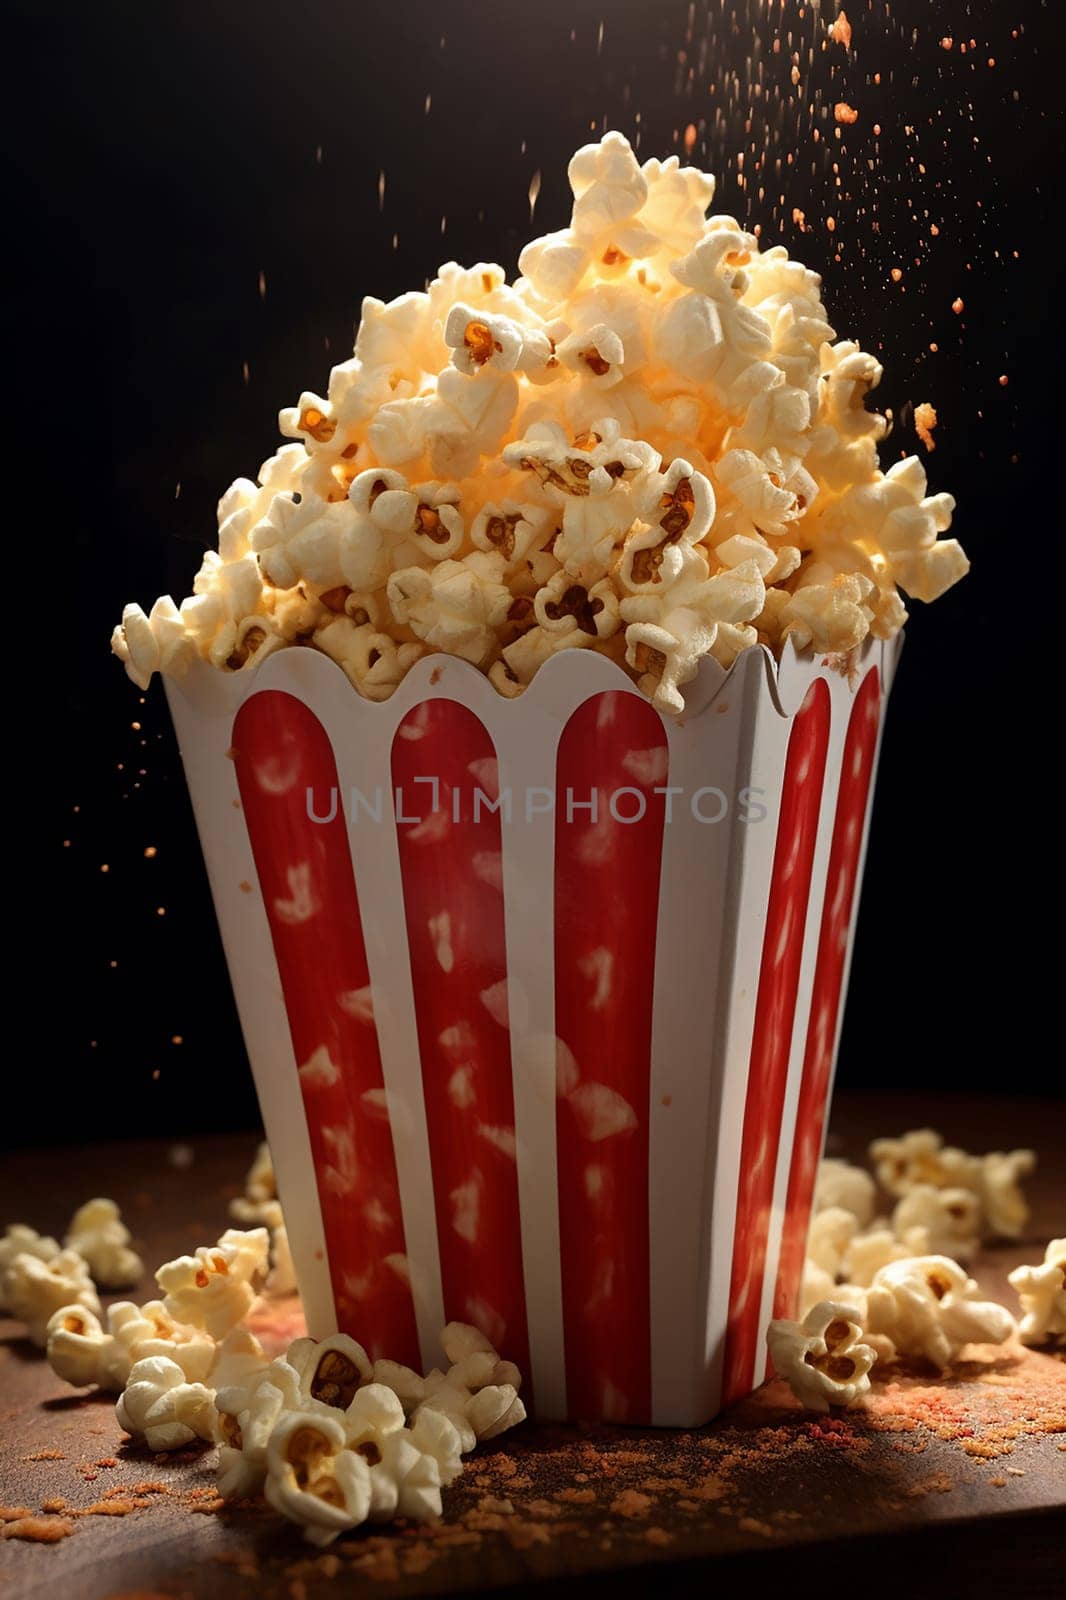 Overflowing popcorn in a striped red and white container by Hype2art